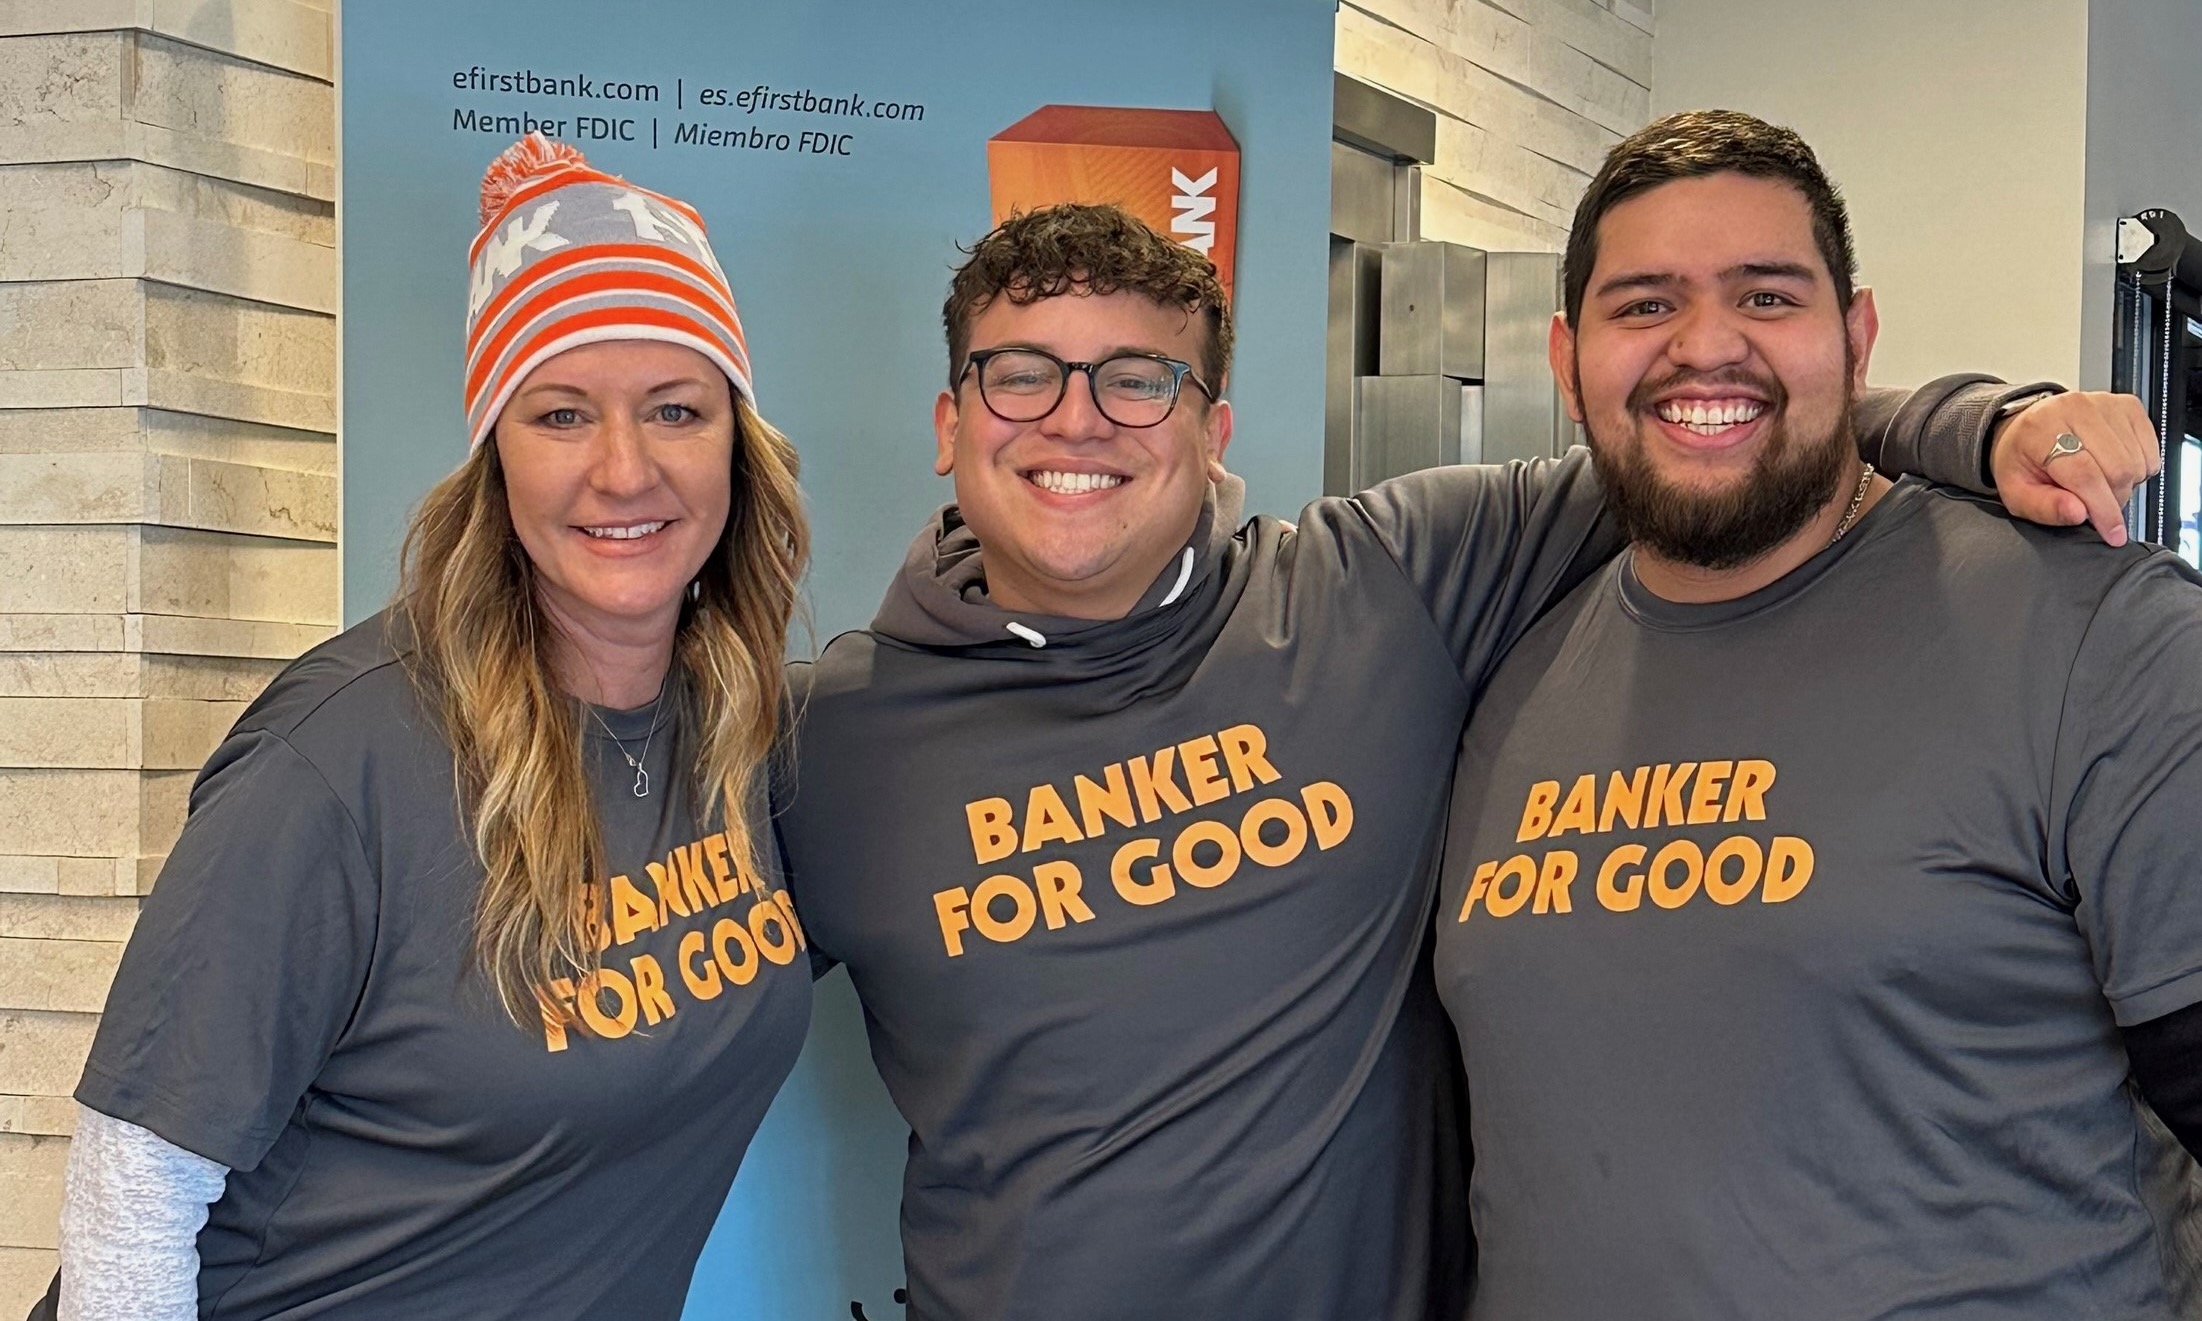 Three FirstBank team members pose for group picture wearing “Banker for Good” t-shirts.